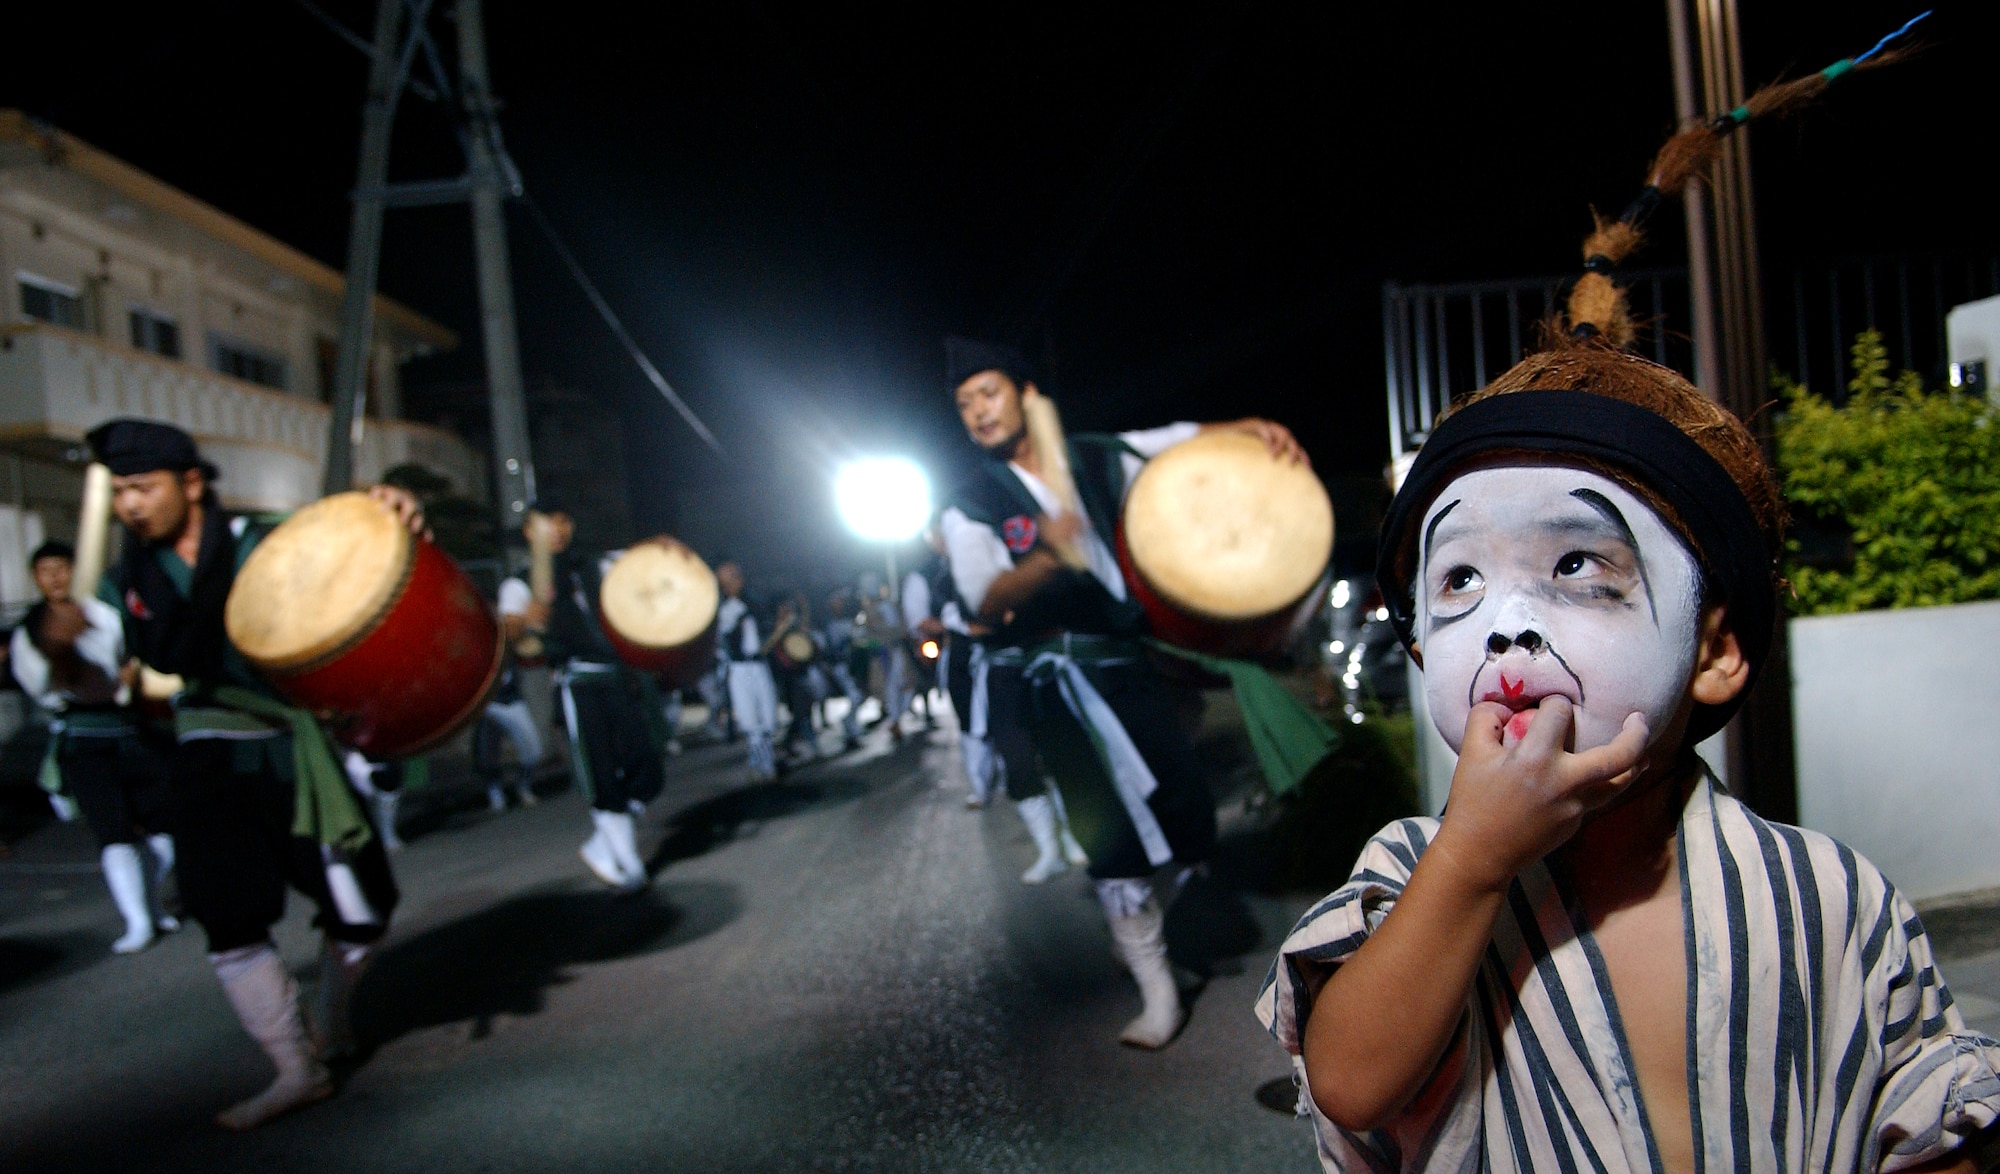 A young Okinawan child participates in an Obon dance or "Eisa."  Throughout Obon, there will be Eisa dancers and family celebration late into the evening.
(U.S. Air Force photo/Tech. Sgt. Rey Ramon)                                                     